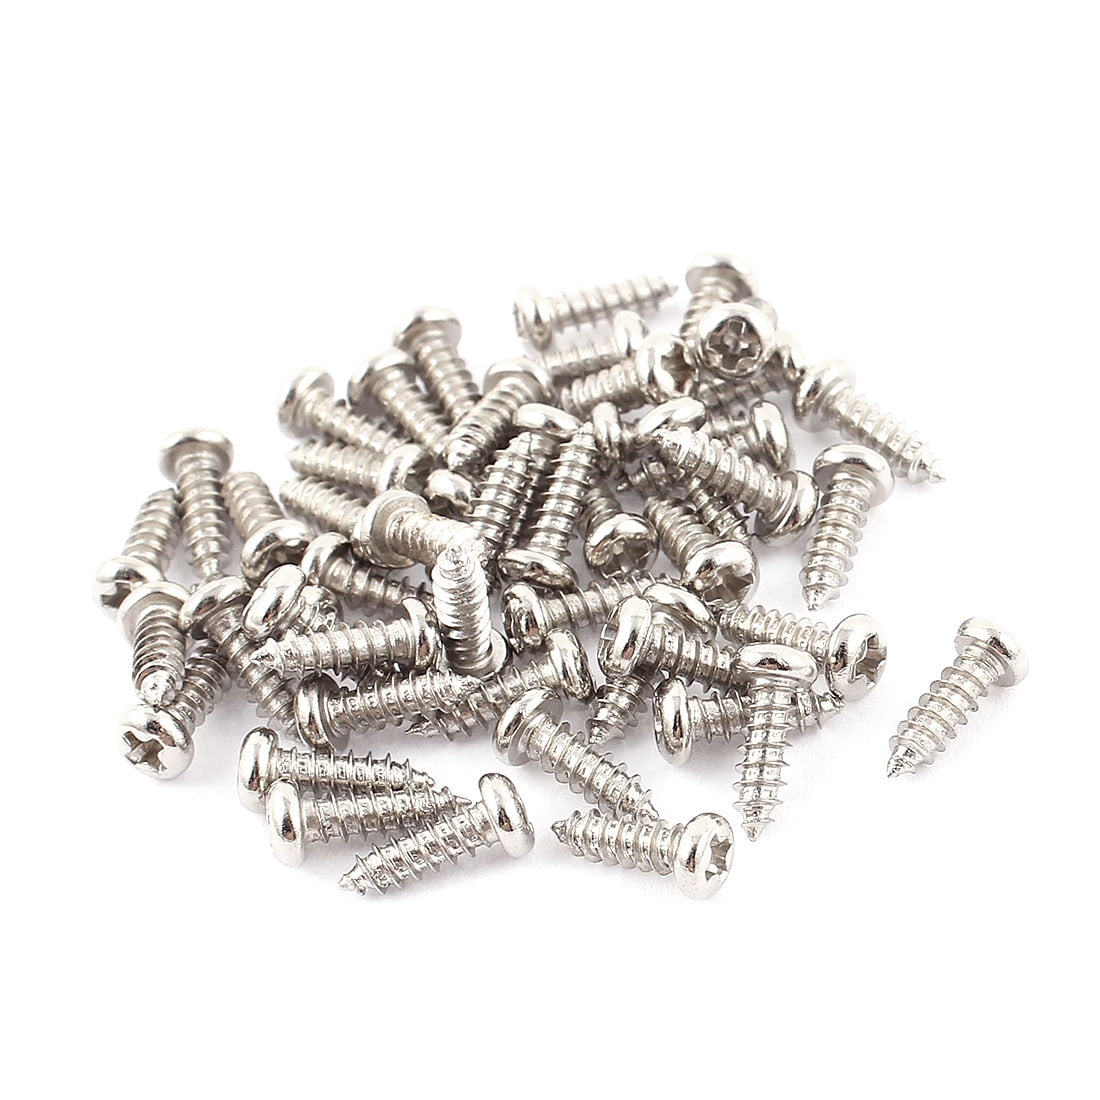 100 Pcs M2.5 x 8mm Stainless Steel Phillips Round Head Self Tapping Screws Bolts 